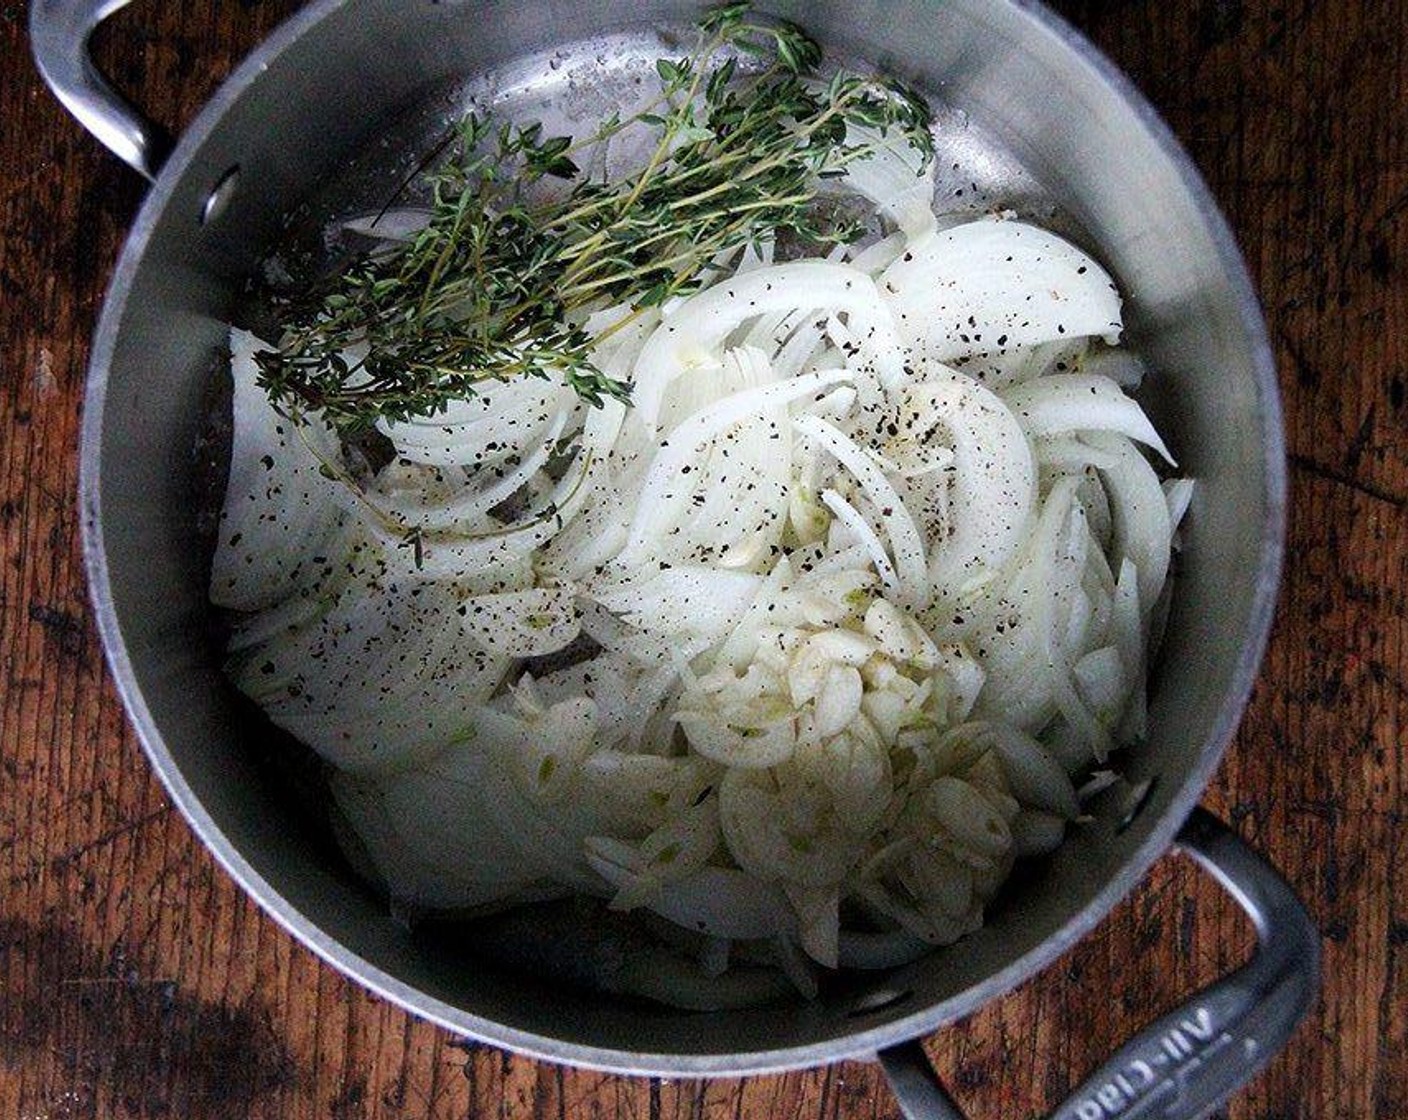 step 1 Melt Unsalted Butter (2 Tbsp) in a large heavy pot over medium heat. Add Fresh Thyme (2 sprigs), Onion (1), and Garlic (2 cloves). Season with Kosher Salt (to taste) and Freshly Ground Black Pepper (to taste). Cook until onion is completely soft and translucent, 10-12 minutes.